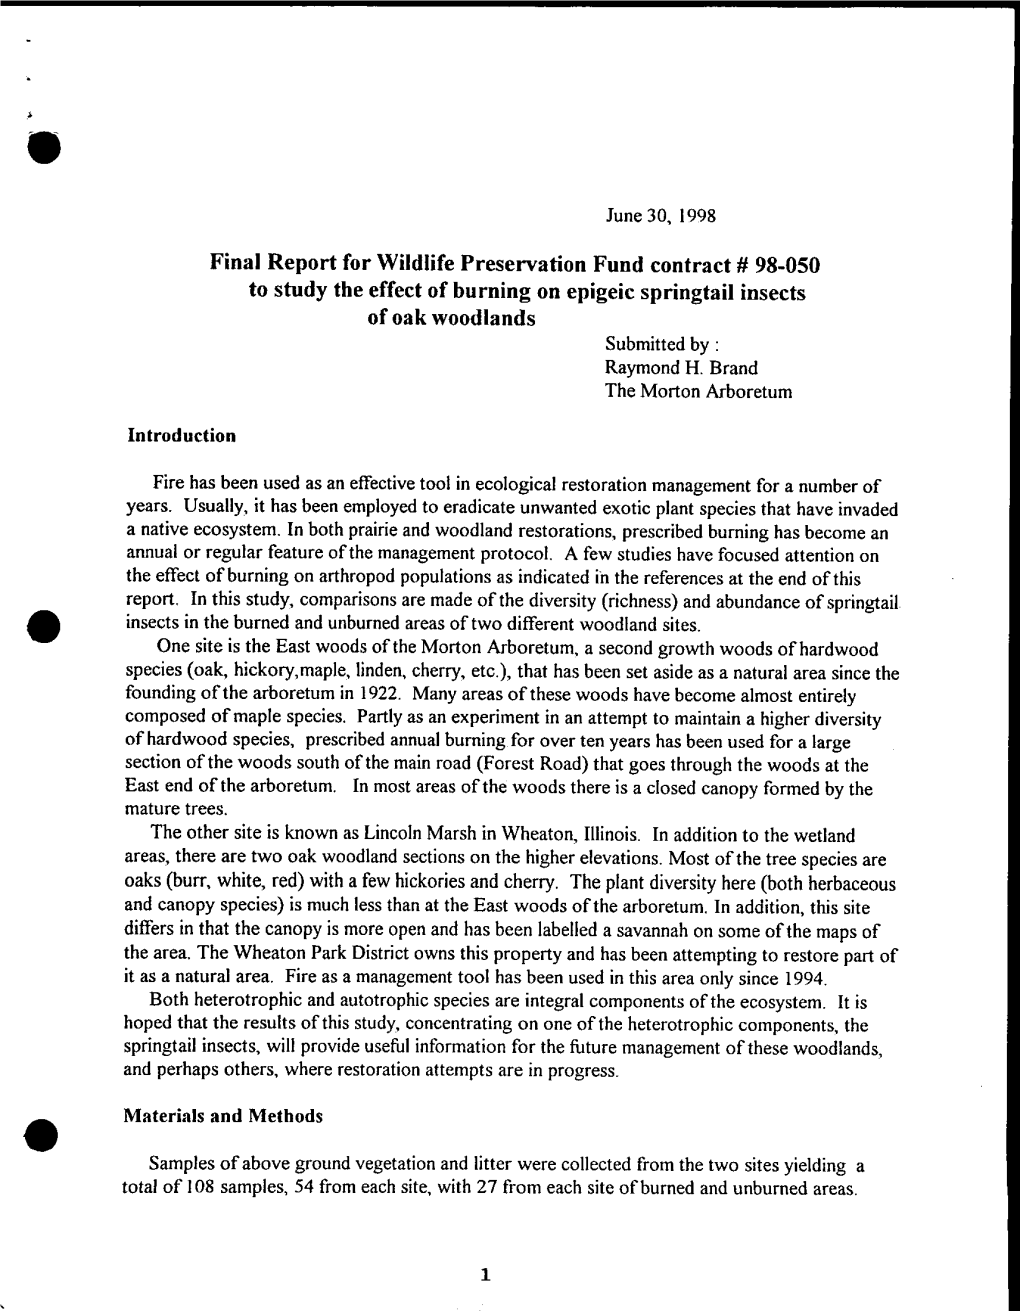 Final Report for Wildlife Preservation Fund Contract # 98-050 to Study the Effect of Burning on Epigeic Springtail Insects of Oak Woodlands Submitted by Raymond H